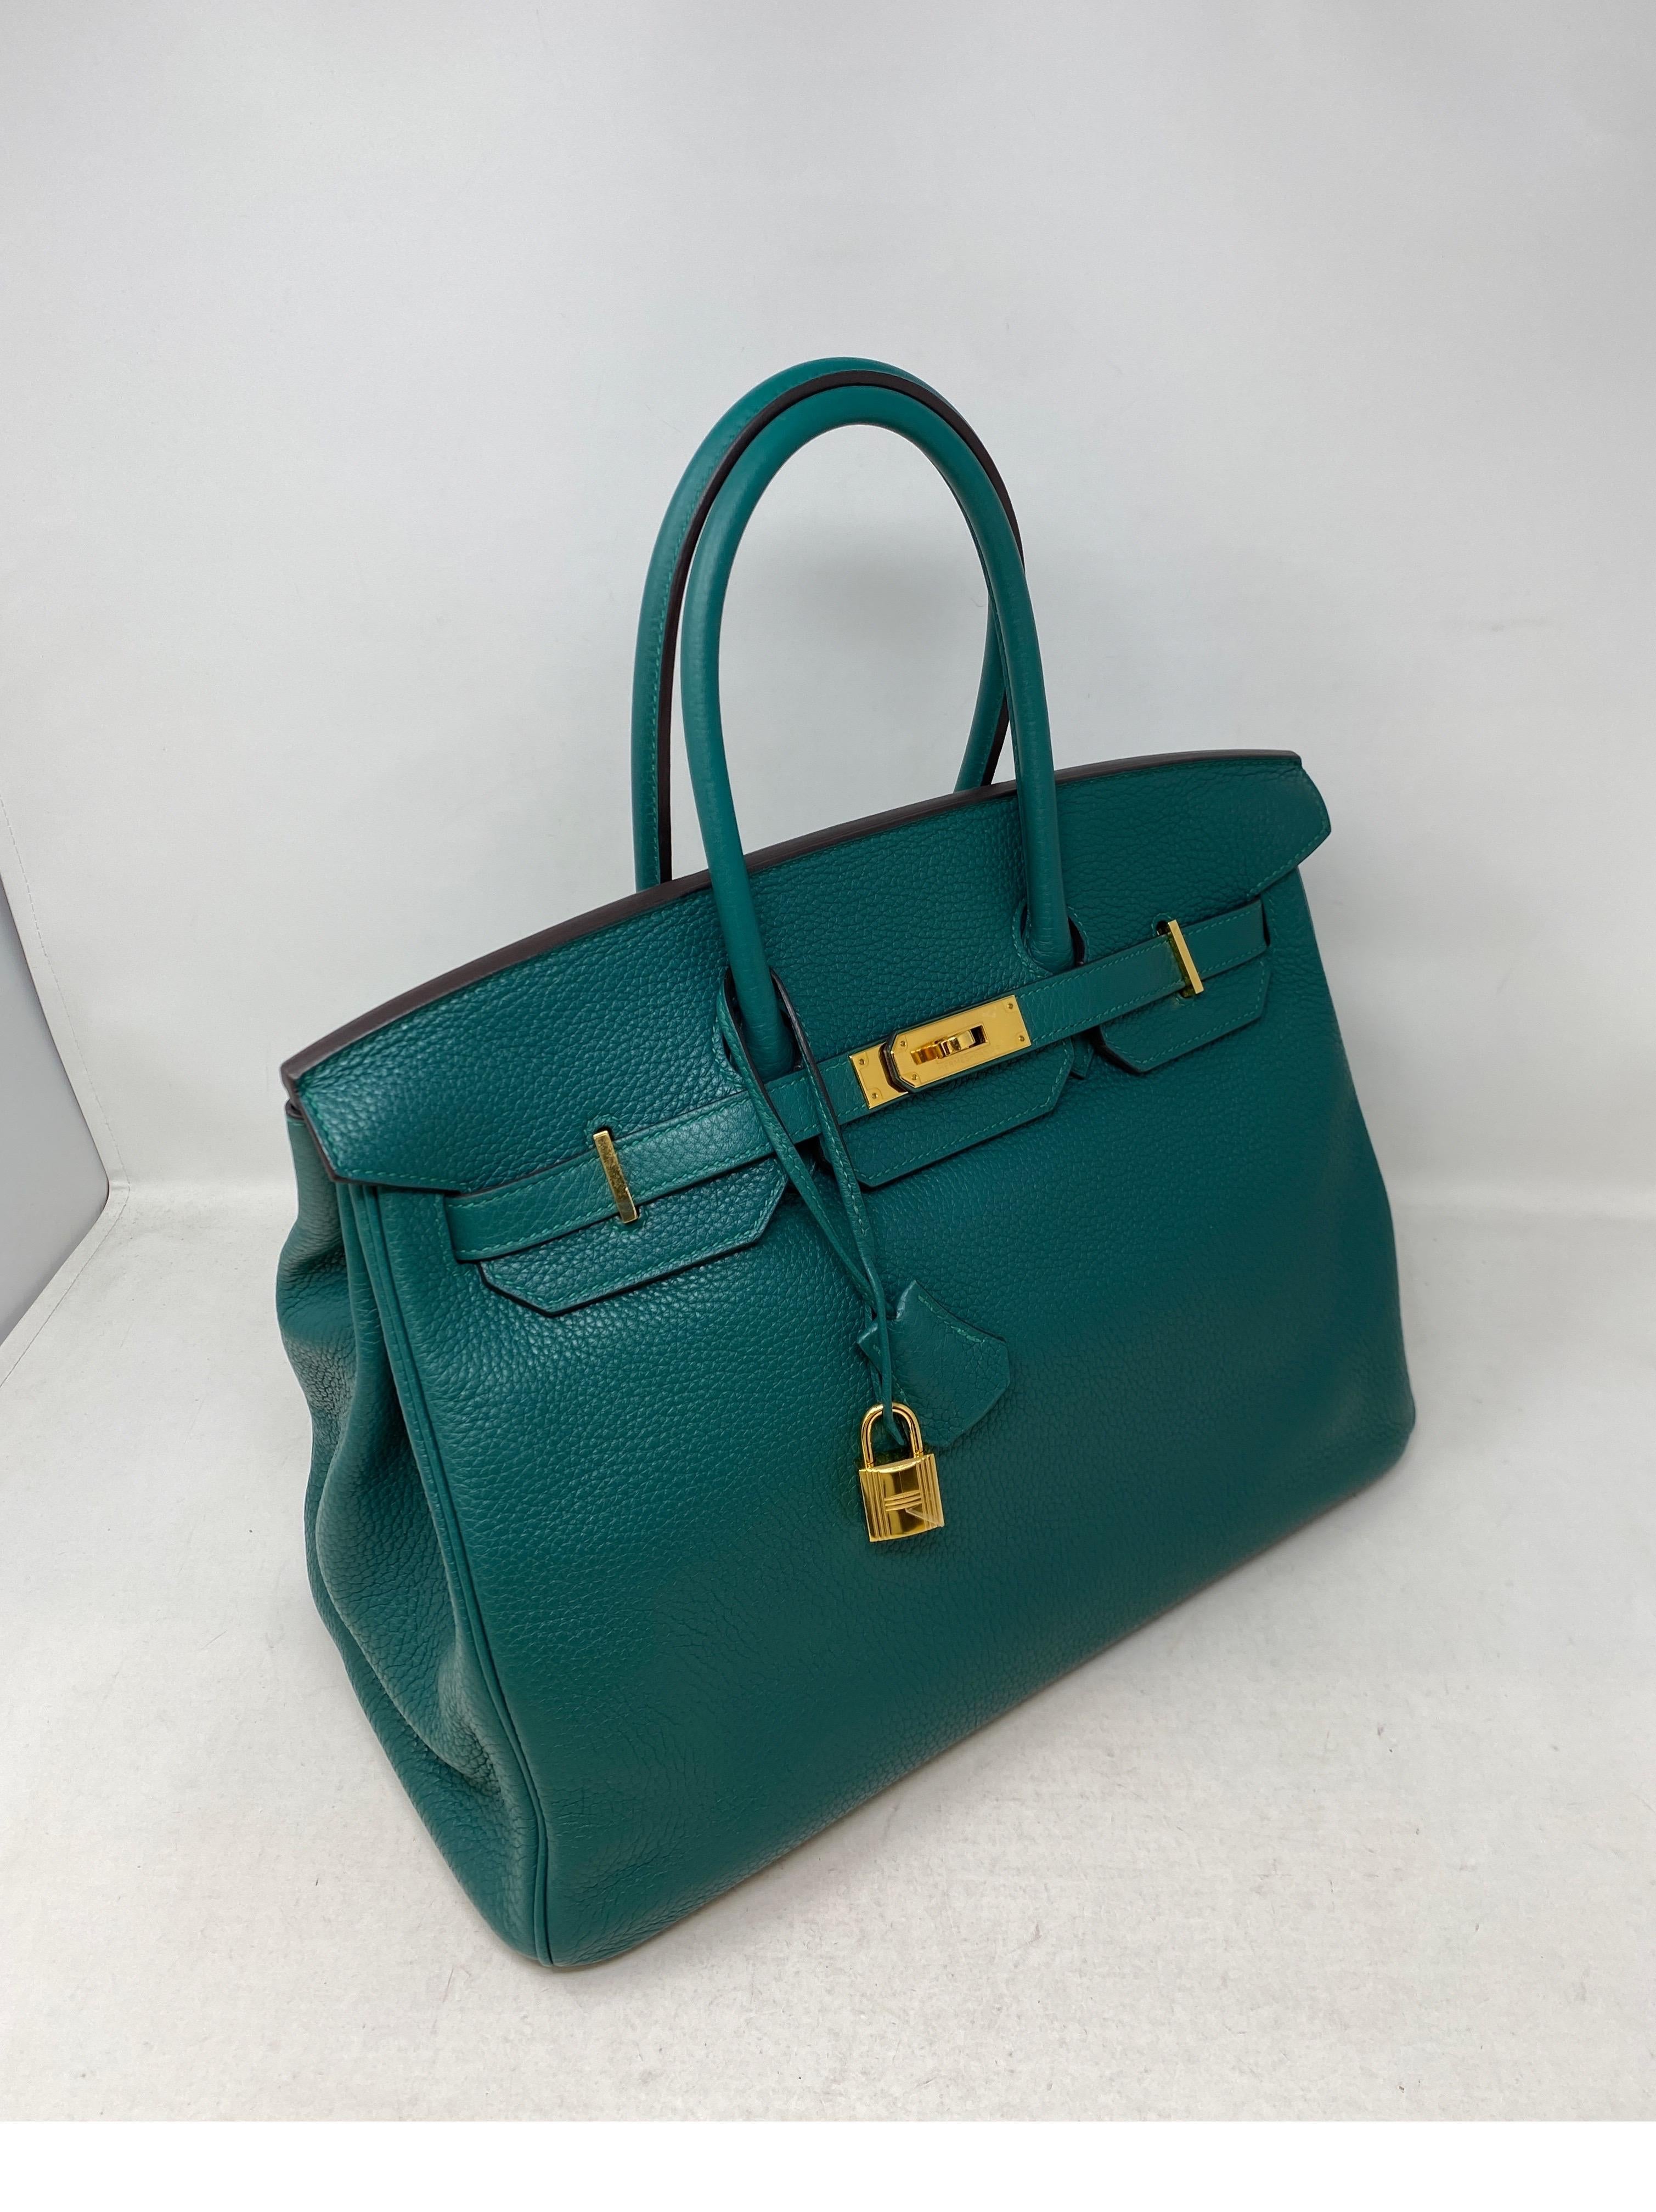 Hermes Malachite 35 Bag. Pretty green color bag with gold hardware. Sturdy leather. Interior clean. Exterior excellent condition. Includes clochette, lock, keys, and dust bag. Guaranteed authentic. 